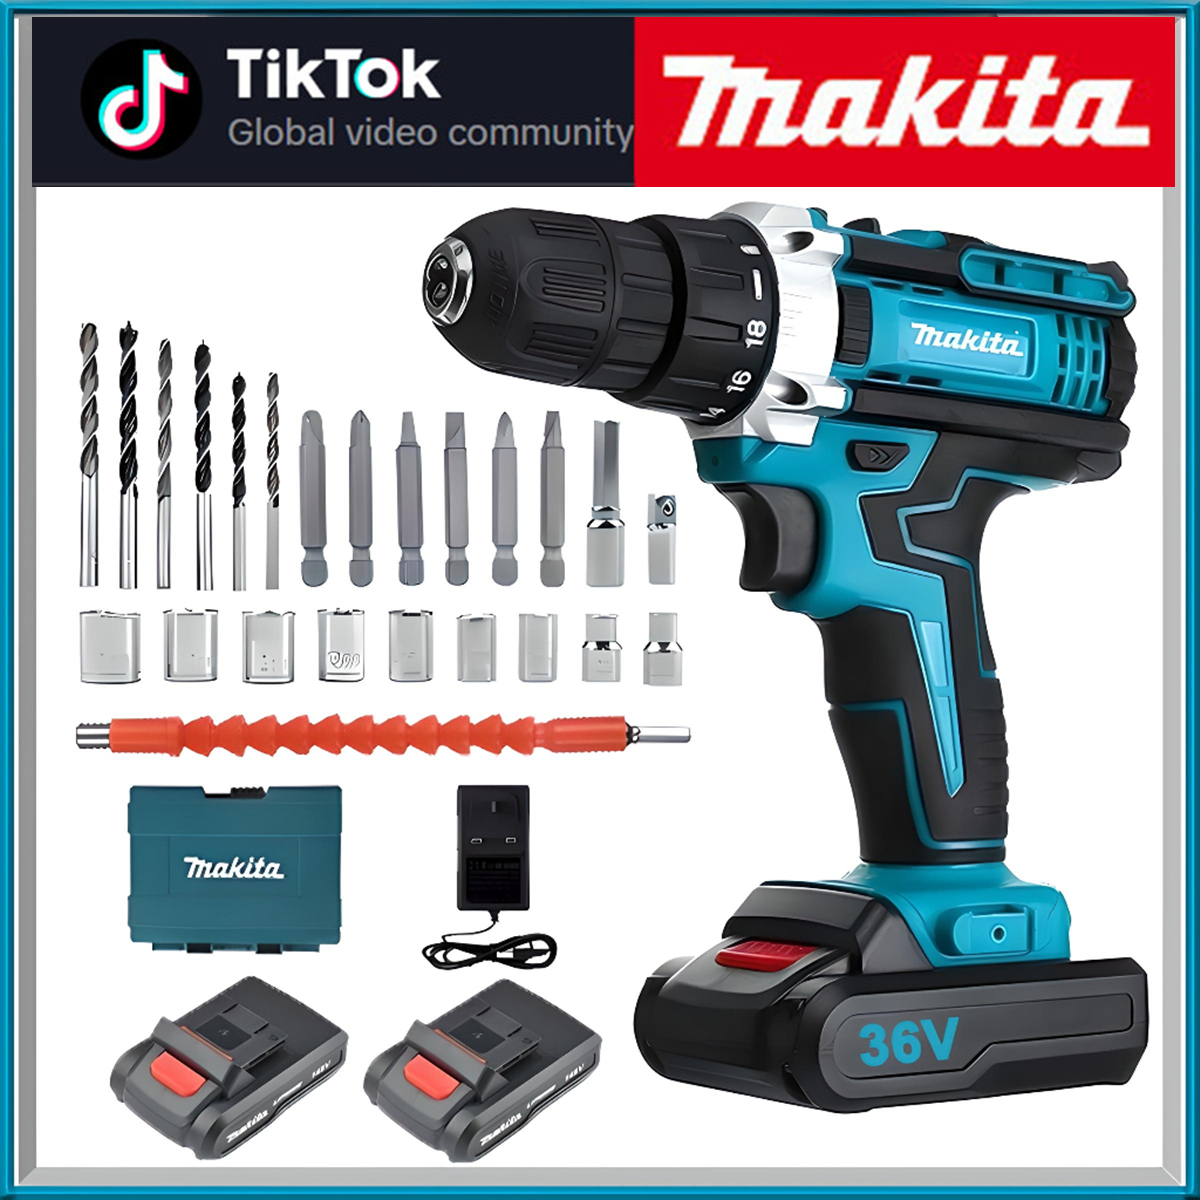 Makita 36v cordless drill, 2 lithium batteries, 3-function high-power screwdriver, multi-function electric impact hammer